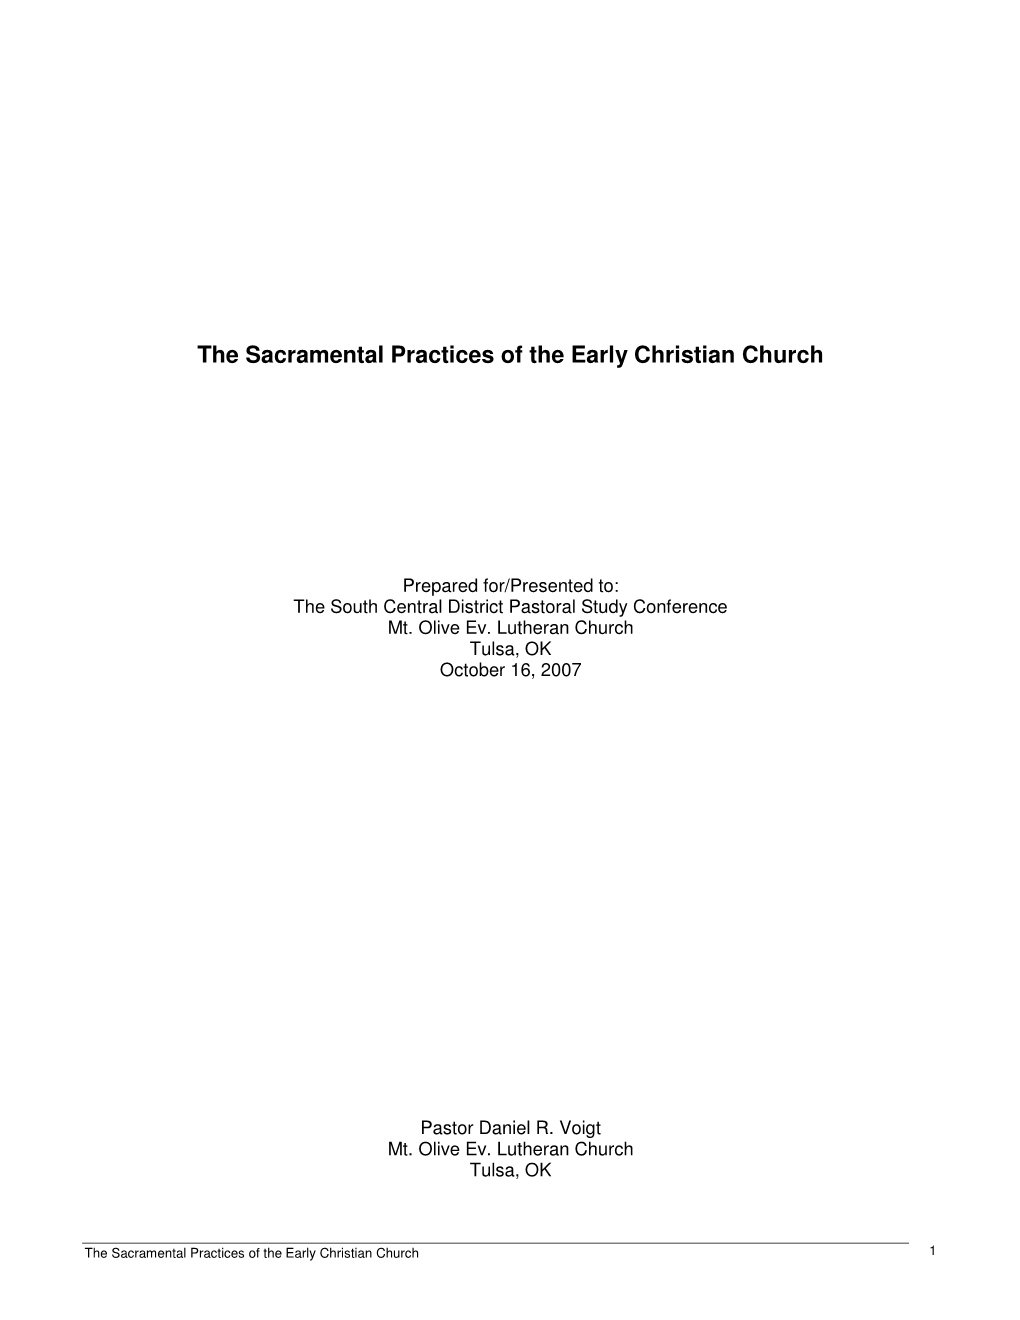 The Sacramental Practices of the Early Christian Church